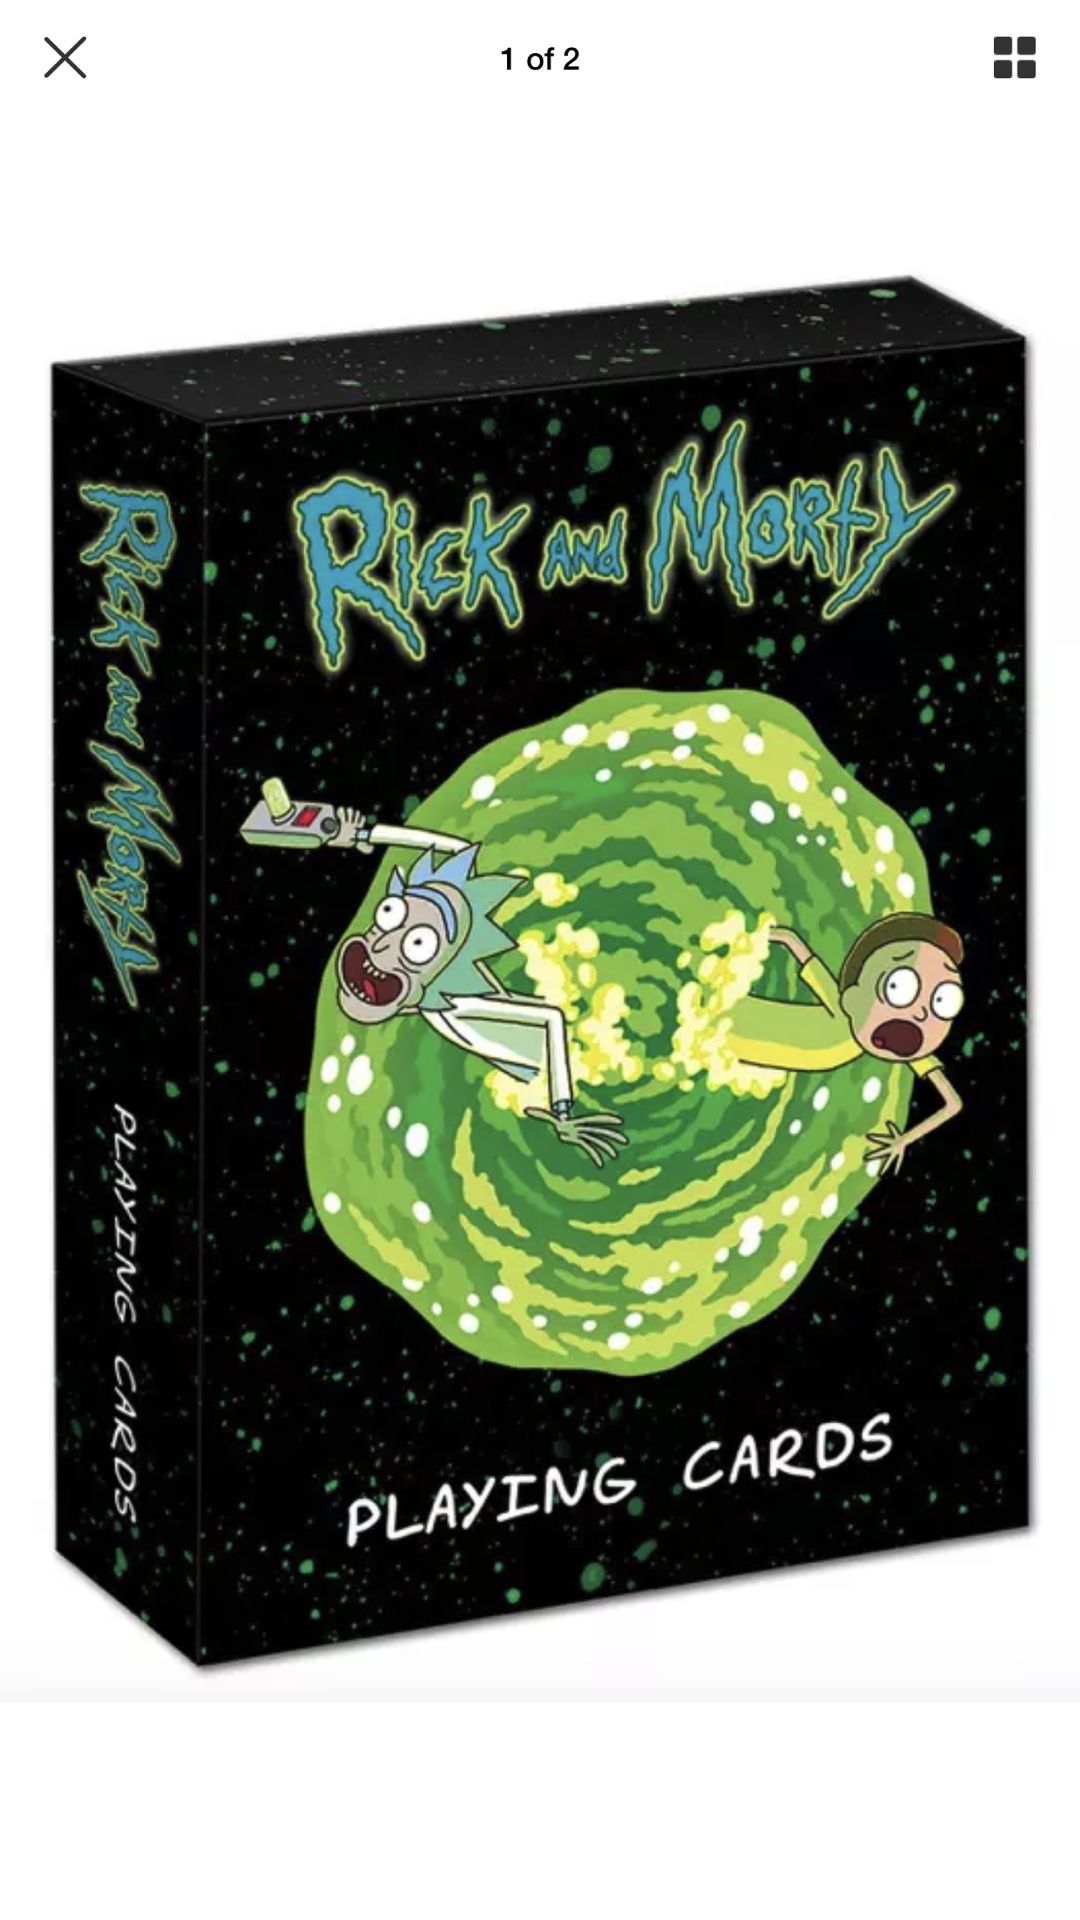 Rick and morty playing cards